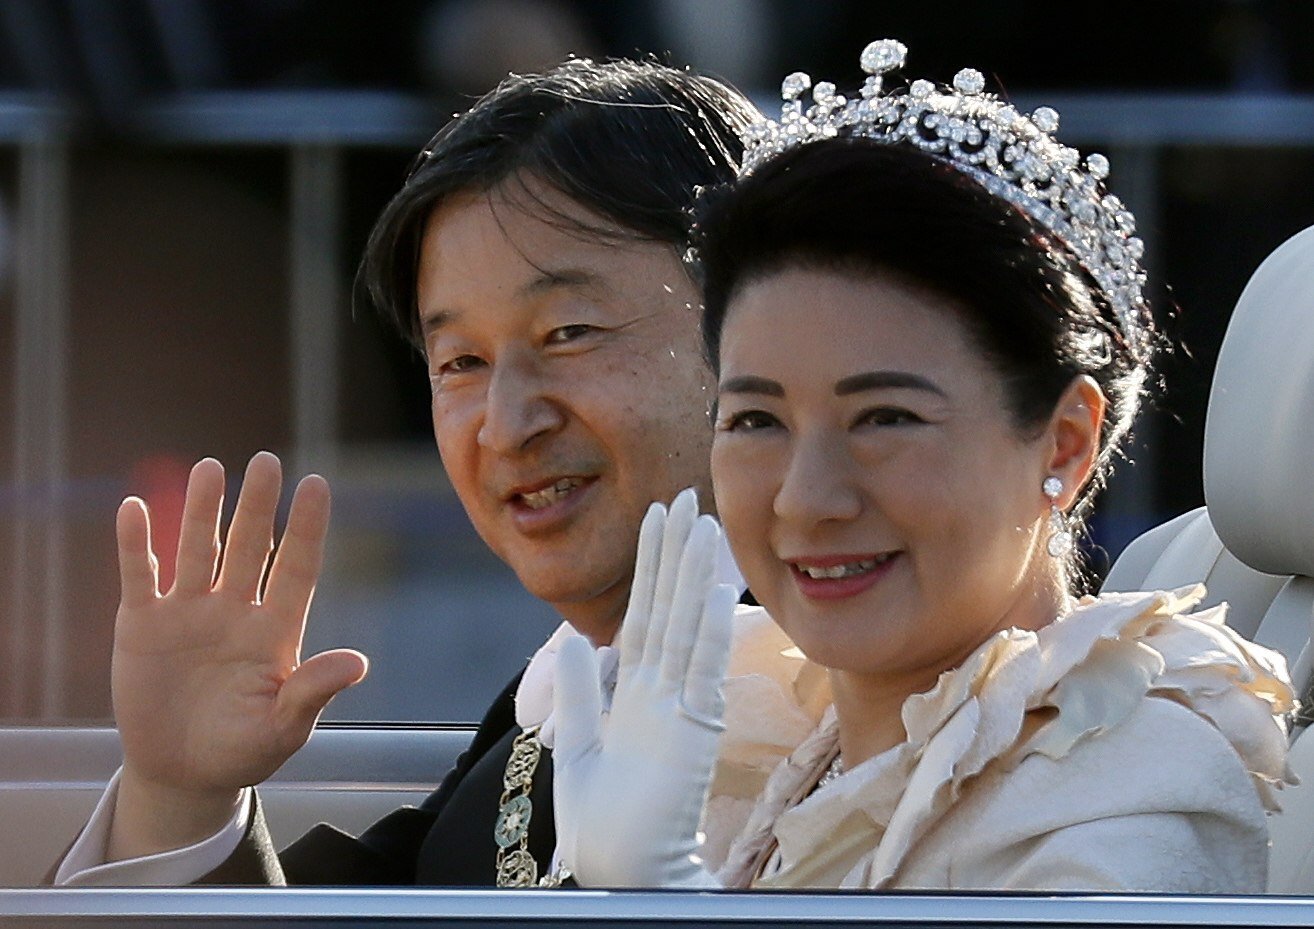 Japan’s Empress Masako and husband Emperor Naruhito wave to well-wishers after his official accession to the Chrysanthemum throne in late 2019, but her usual look is more understated and dominated by pearls. Photo: EPA-EFE